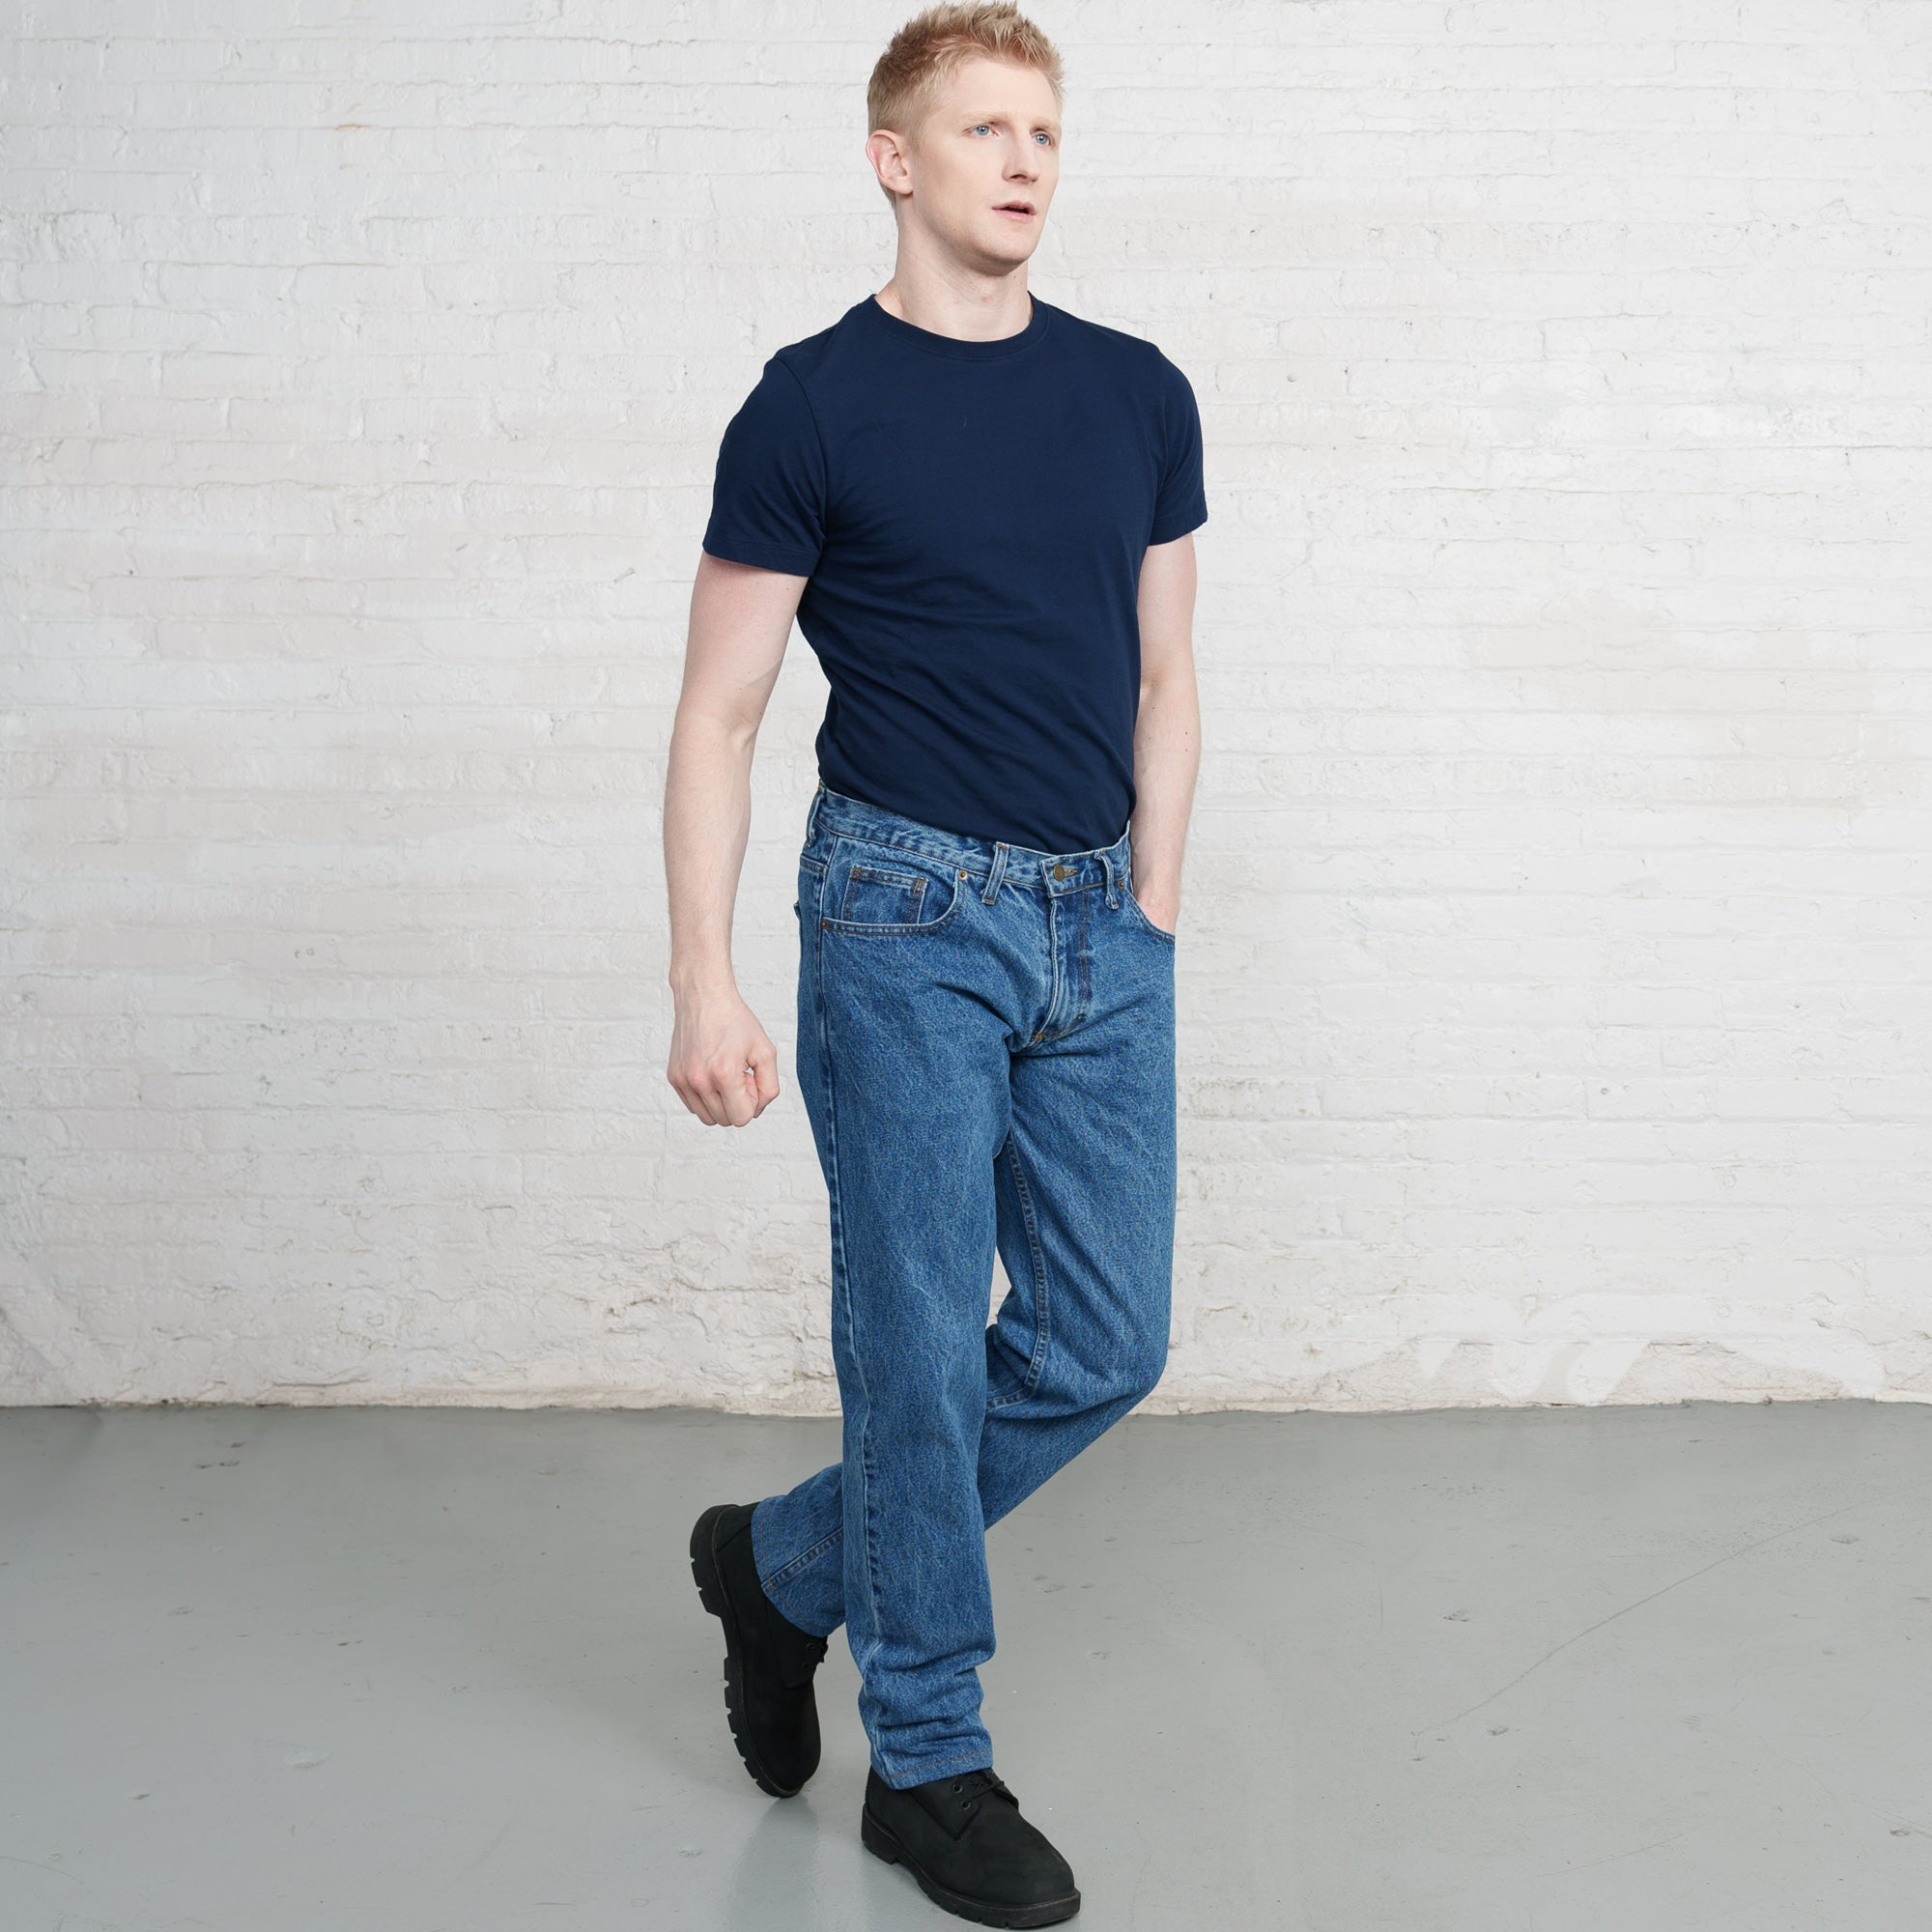 15 Best Pairs of Non-Stretch Jeans | Well+Good